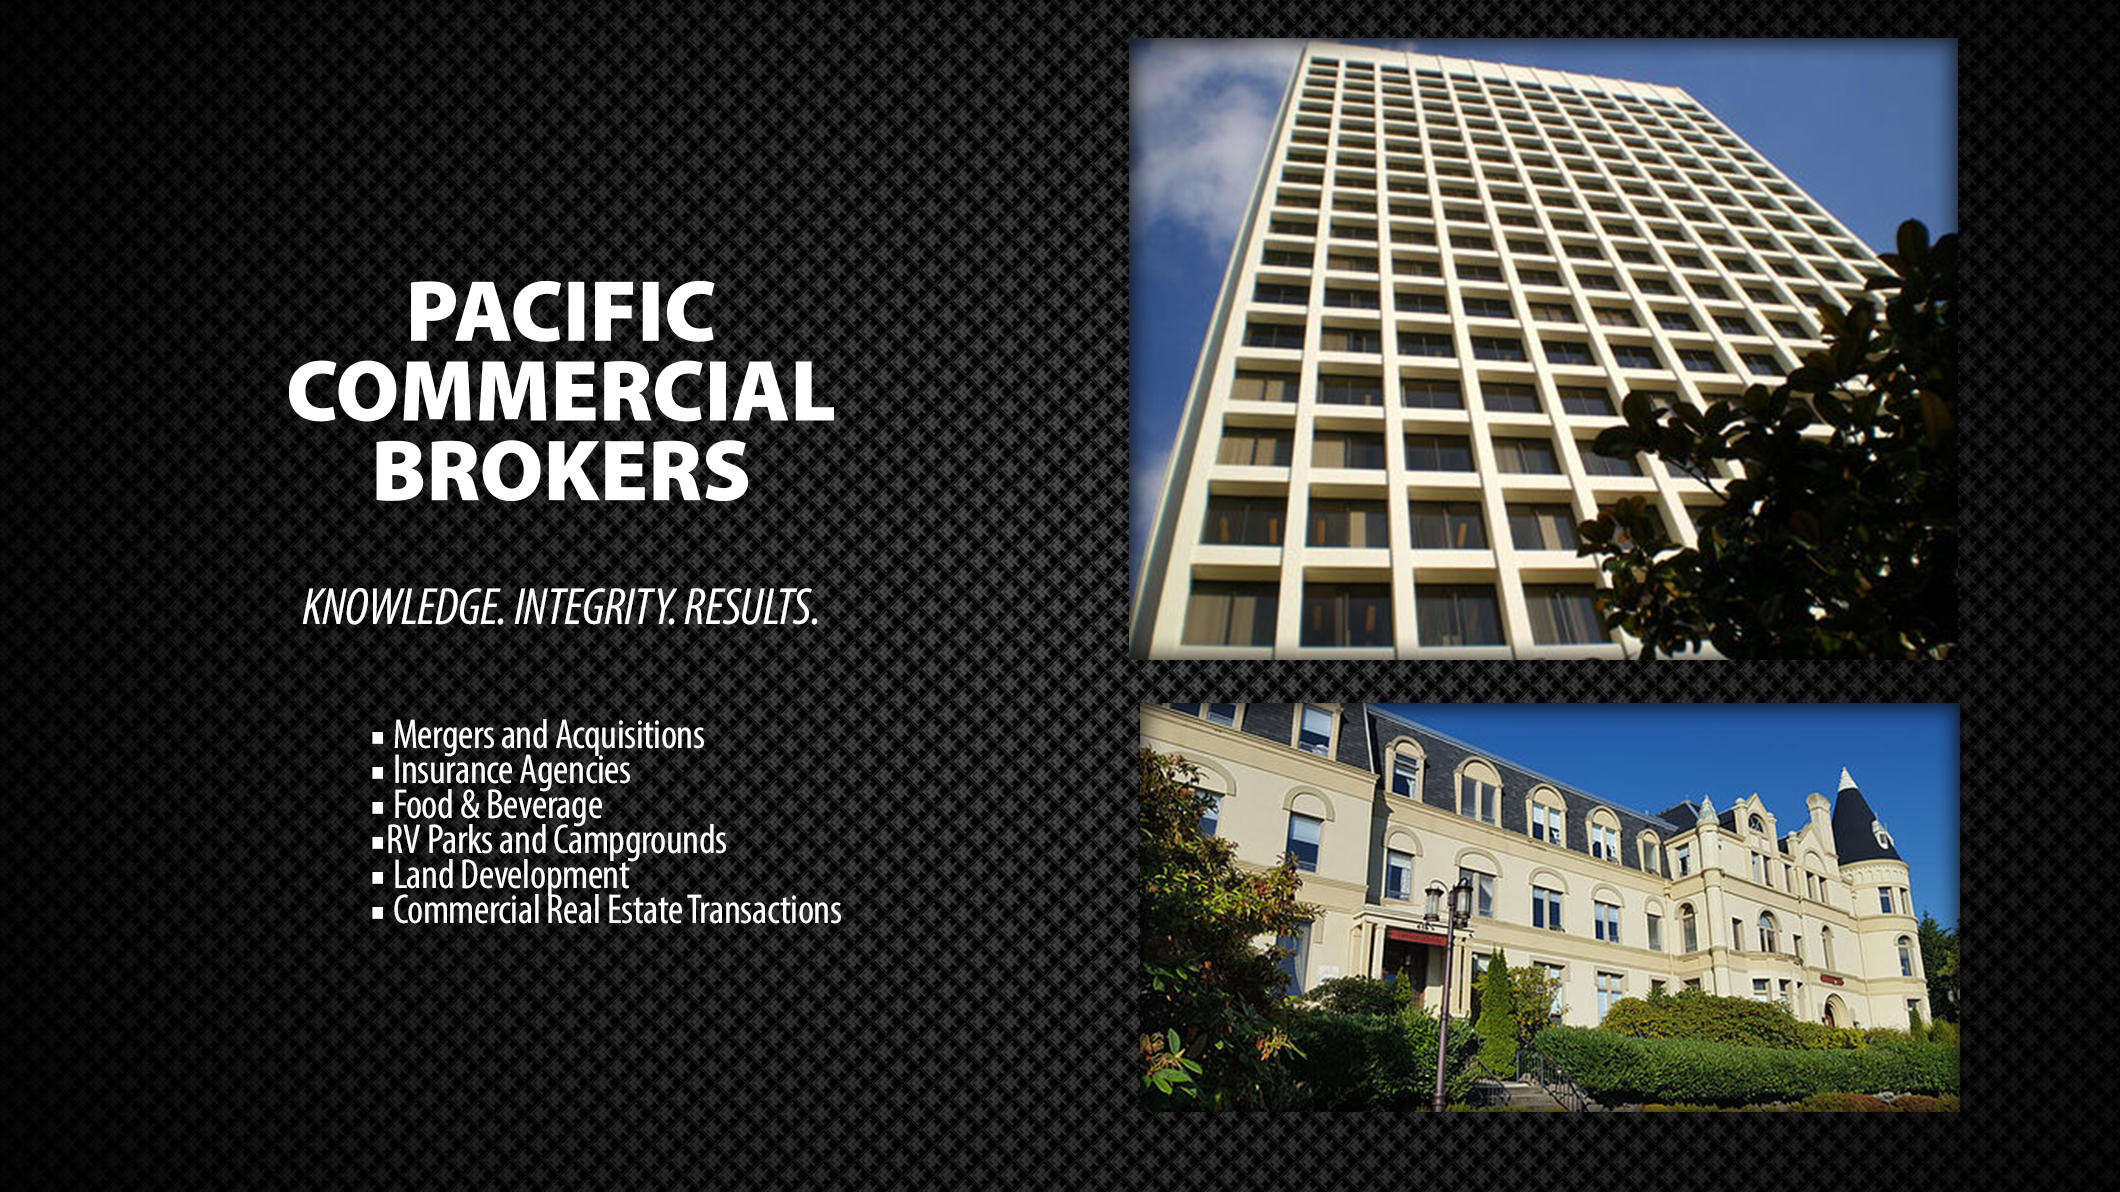 Knowledge. Integrity. Results. | Pacific Commercial Brokers